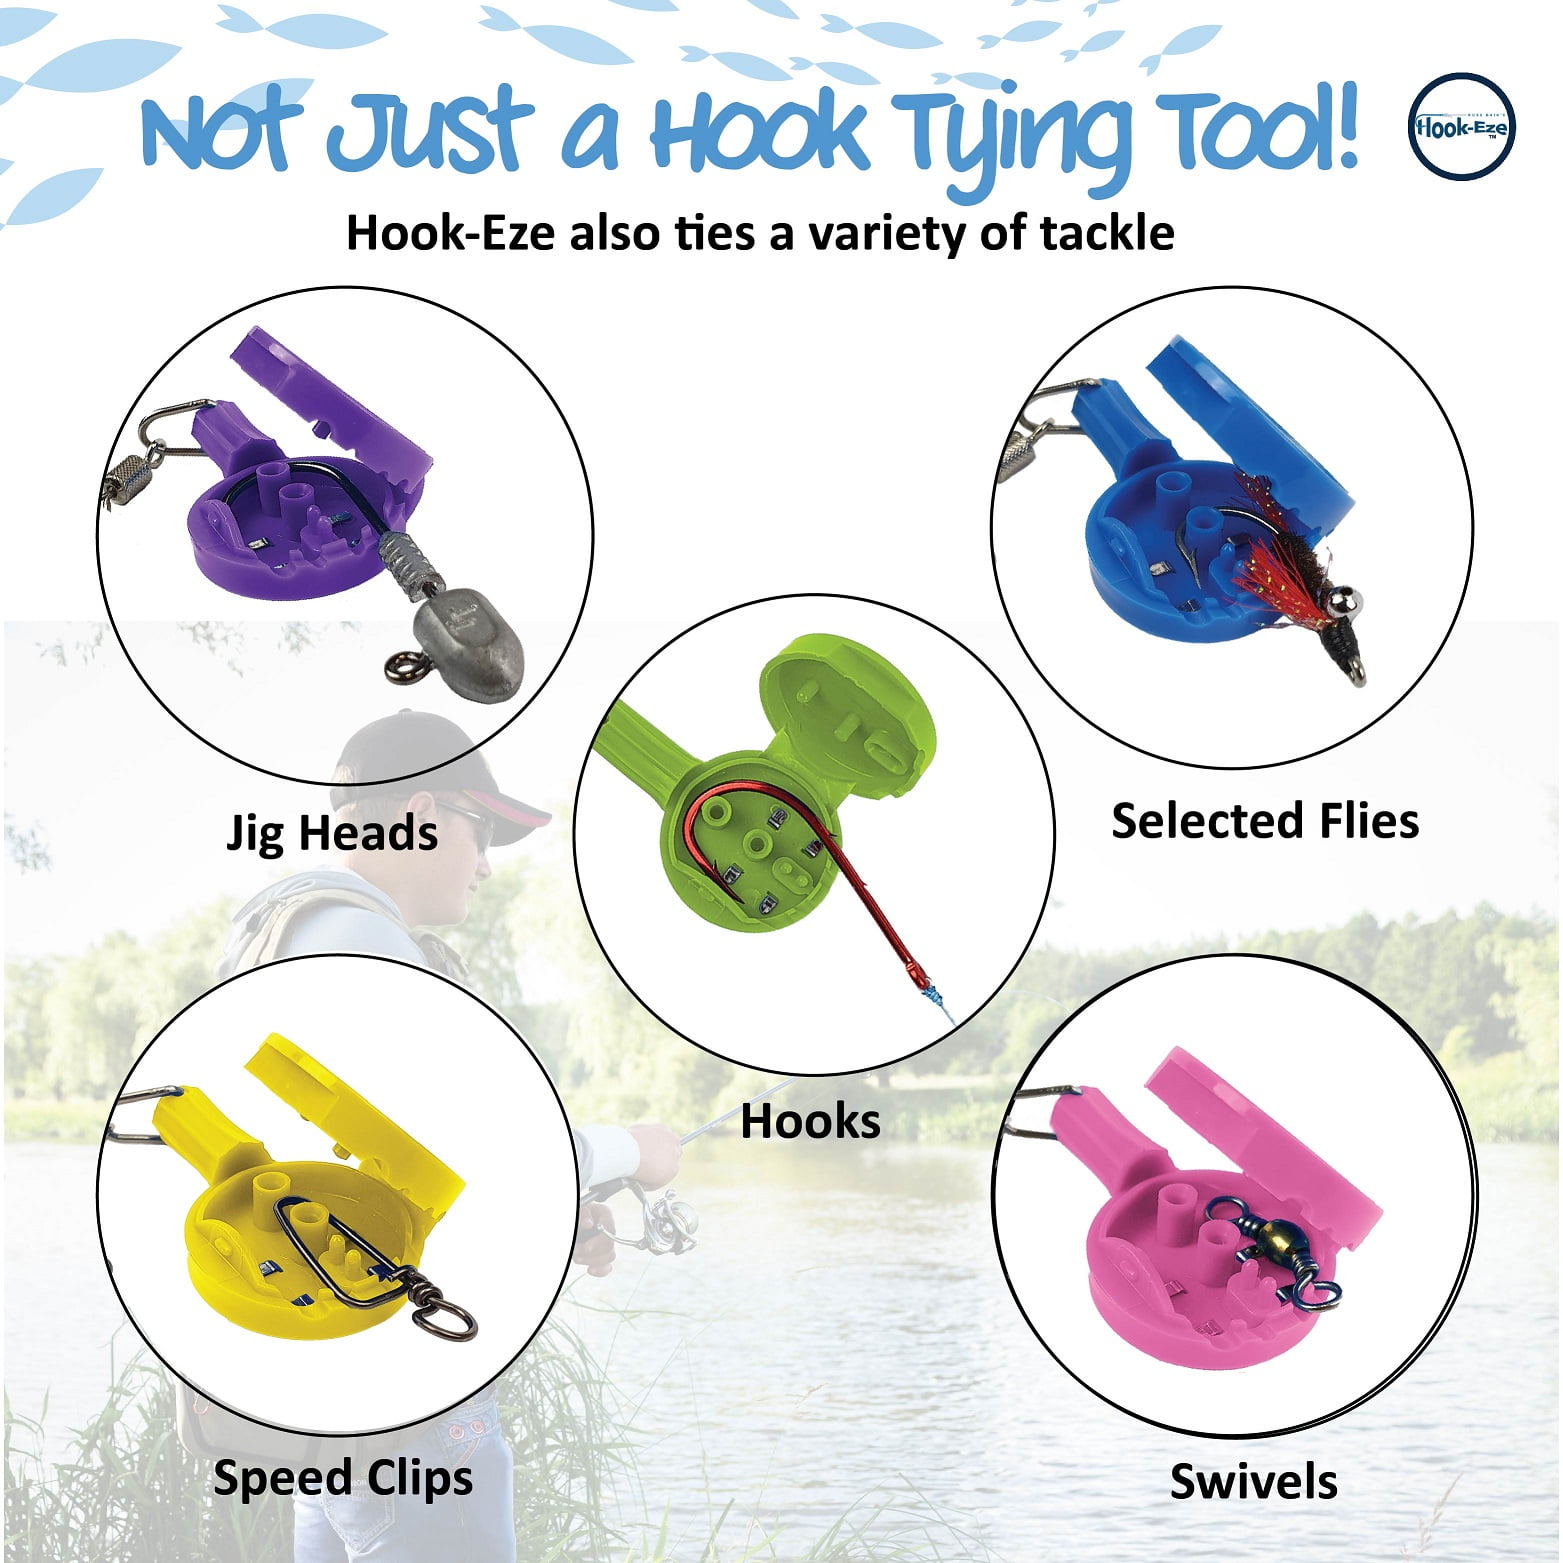 Hook-Eze Fishing Gear Knot Tying Tool | Line Cutter |Cover Hooks on Fishing  Pole Travel Safely Fully Rigged for Saltwater Bass Ice Fishing